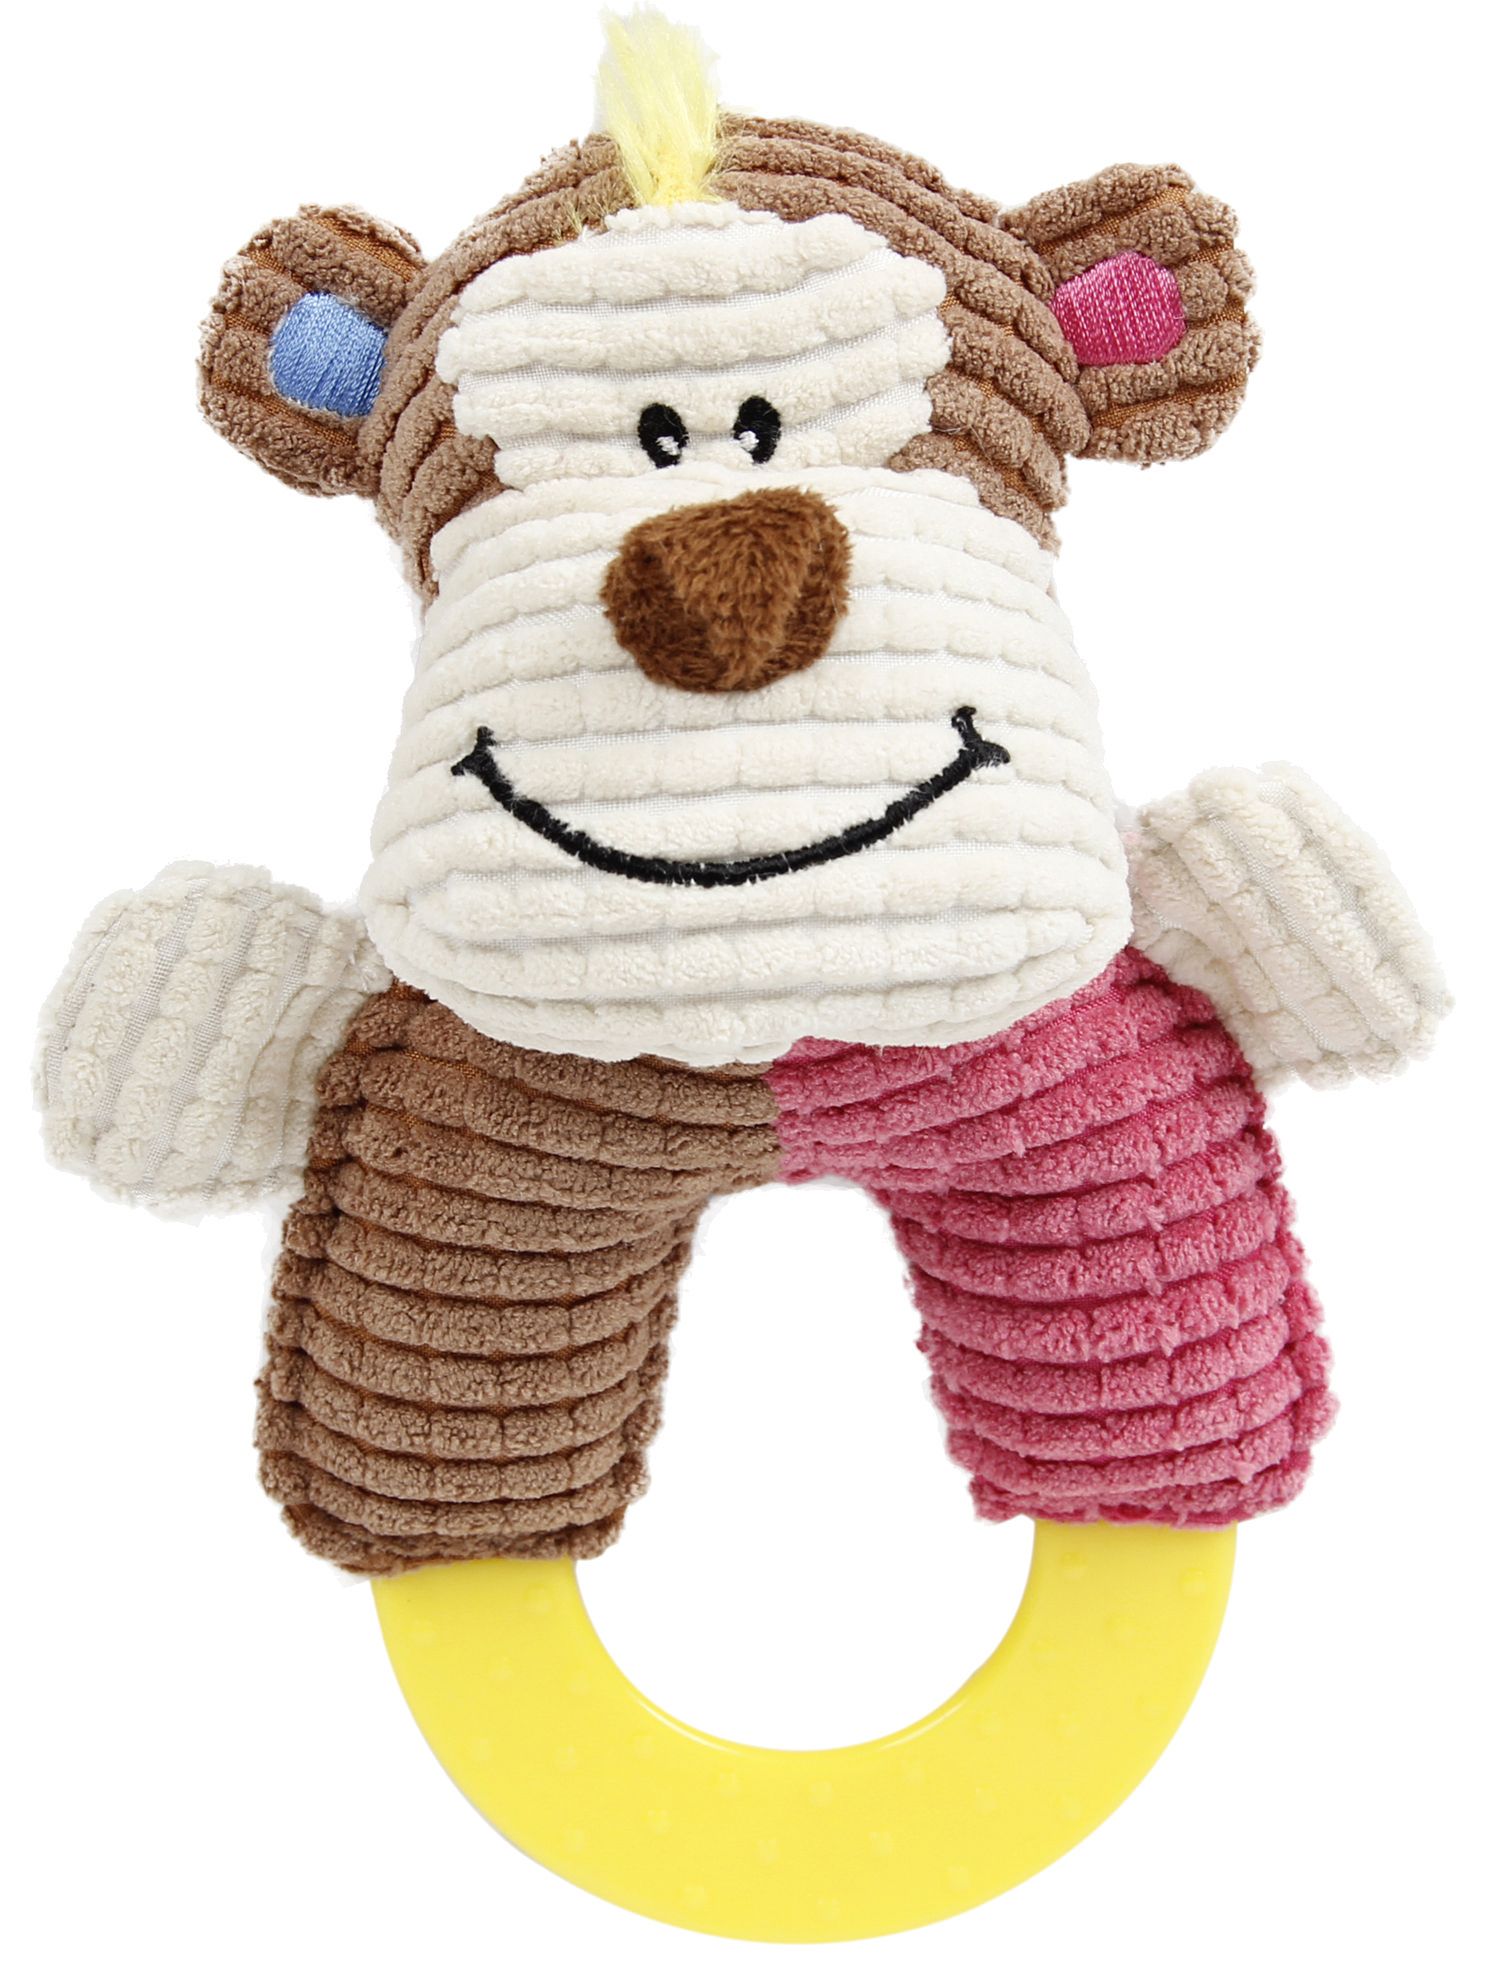 Pet Life ® 'Ring-O-Round' Plush Squeaking and Rubber Teething Newborn Puppy Dog Toy Pink, Brown 